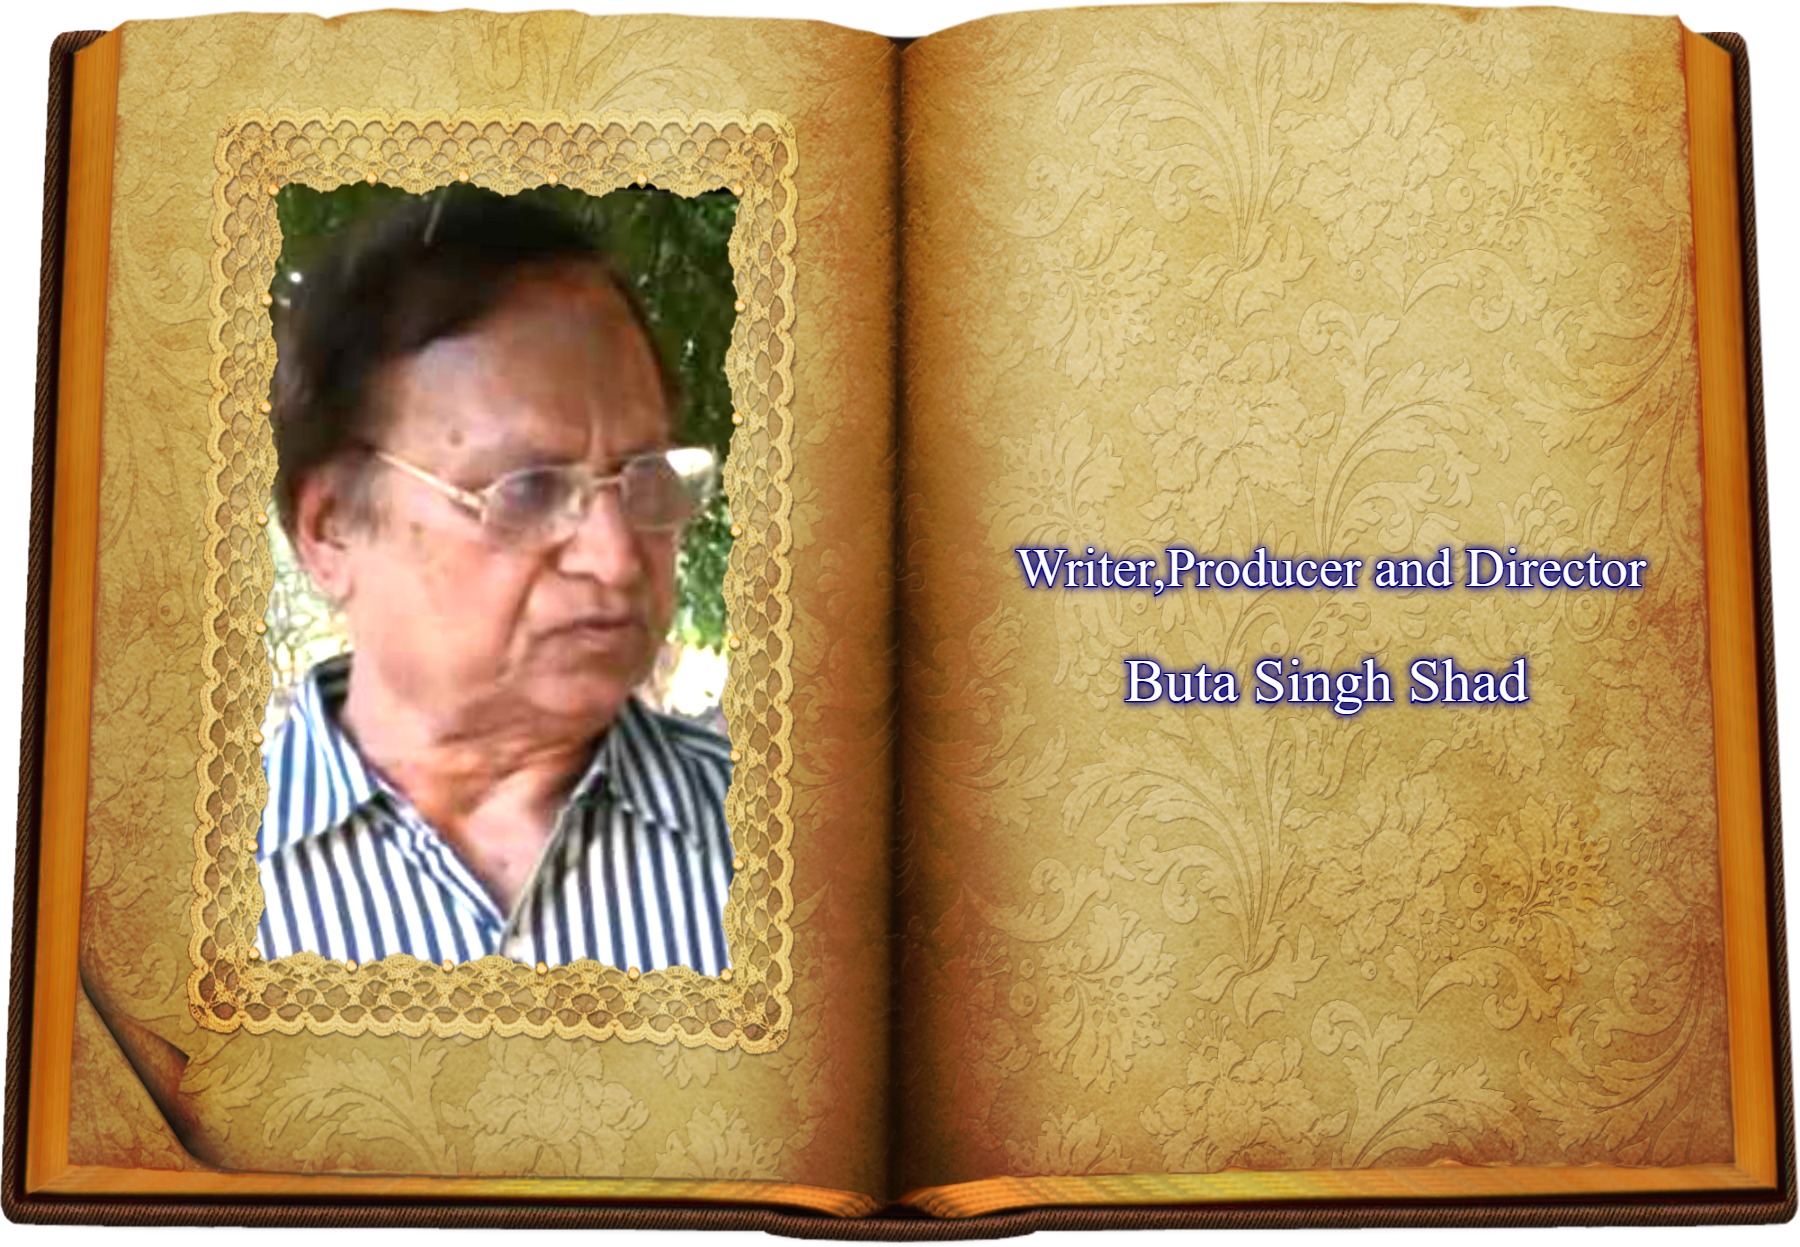 You are currently viewing “Noted Novelist & Filmmaker Buta Singh Shad Passes Away”